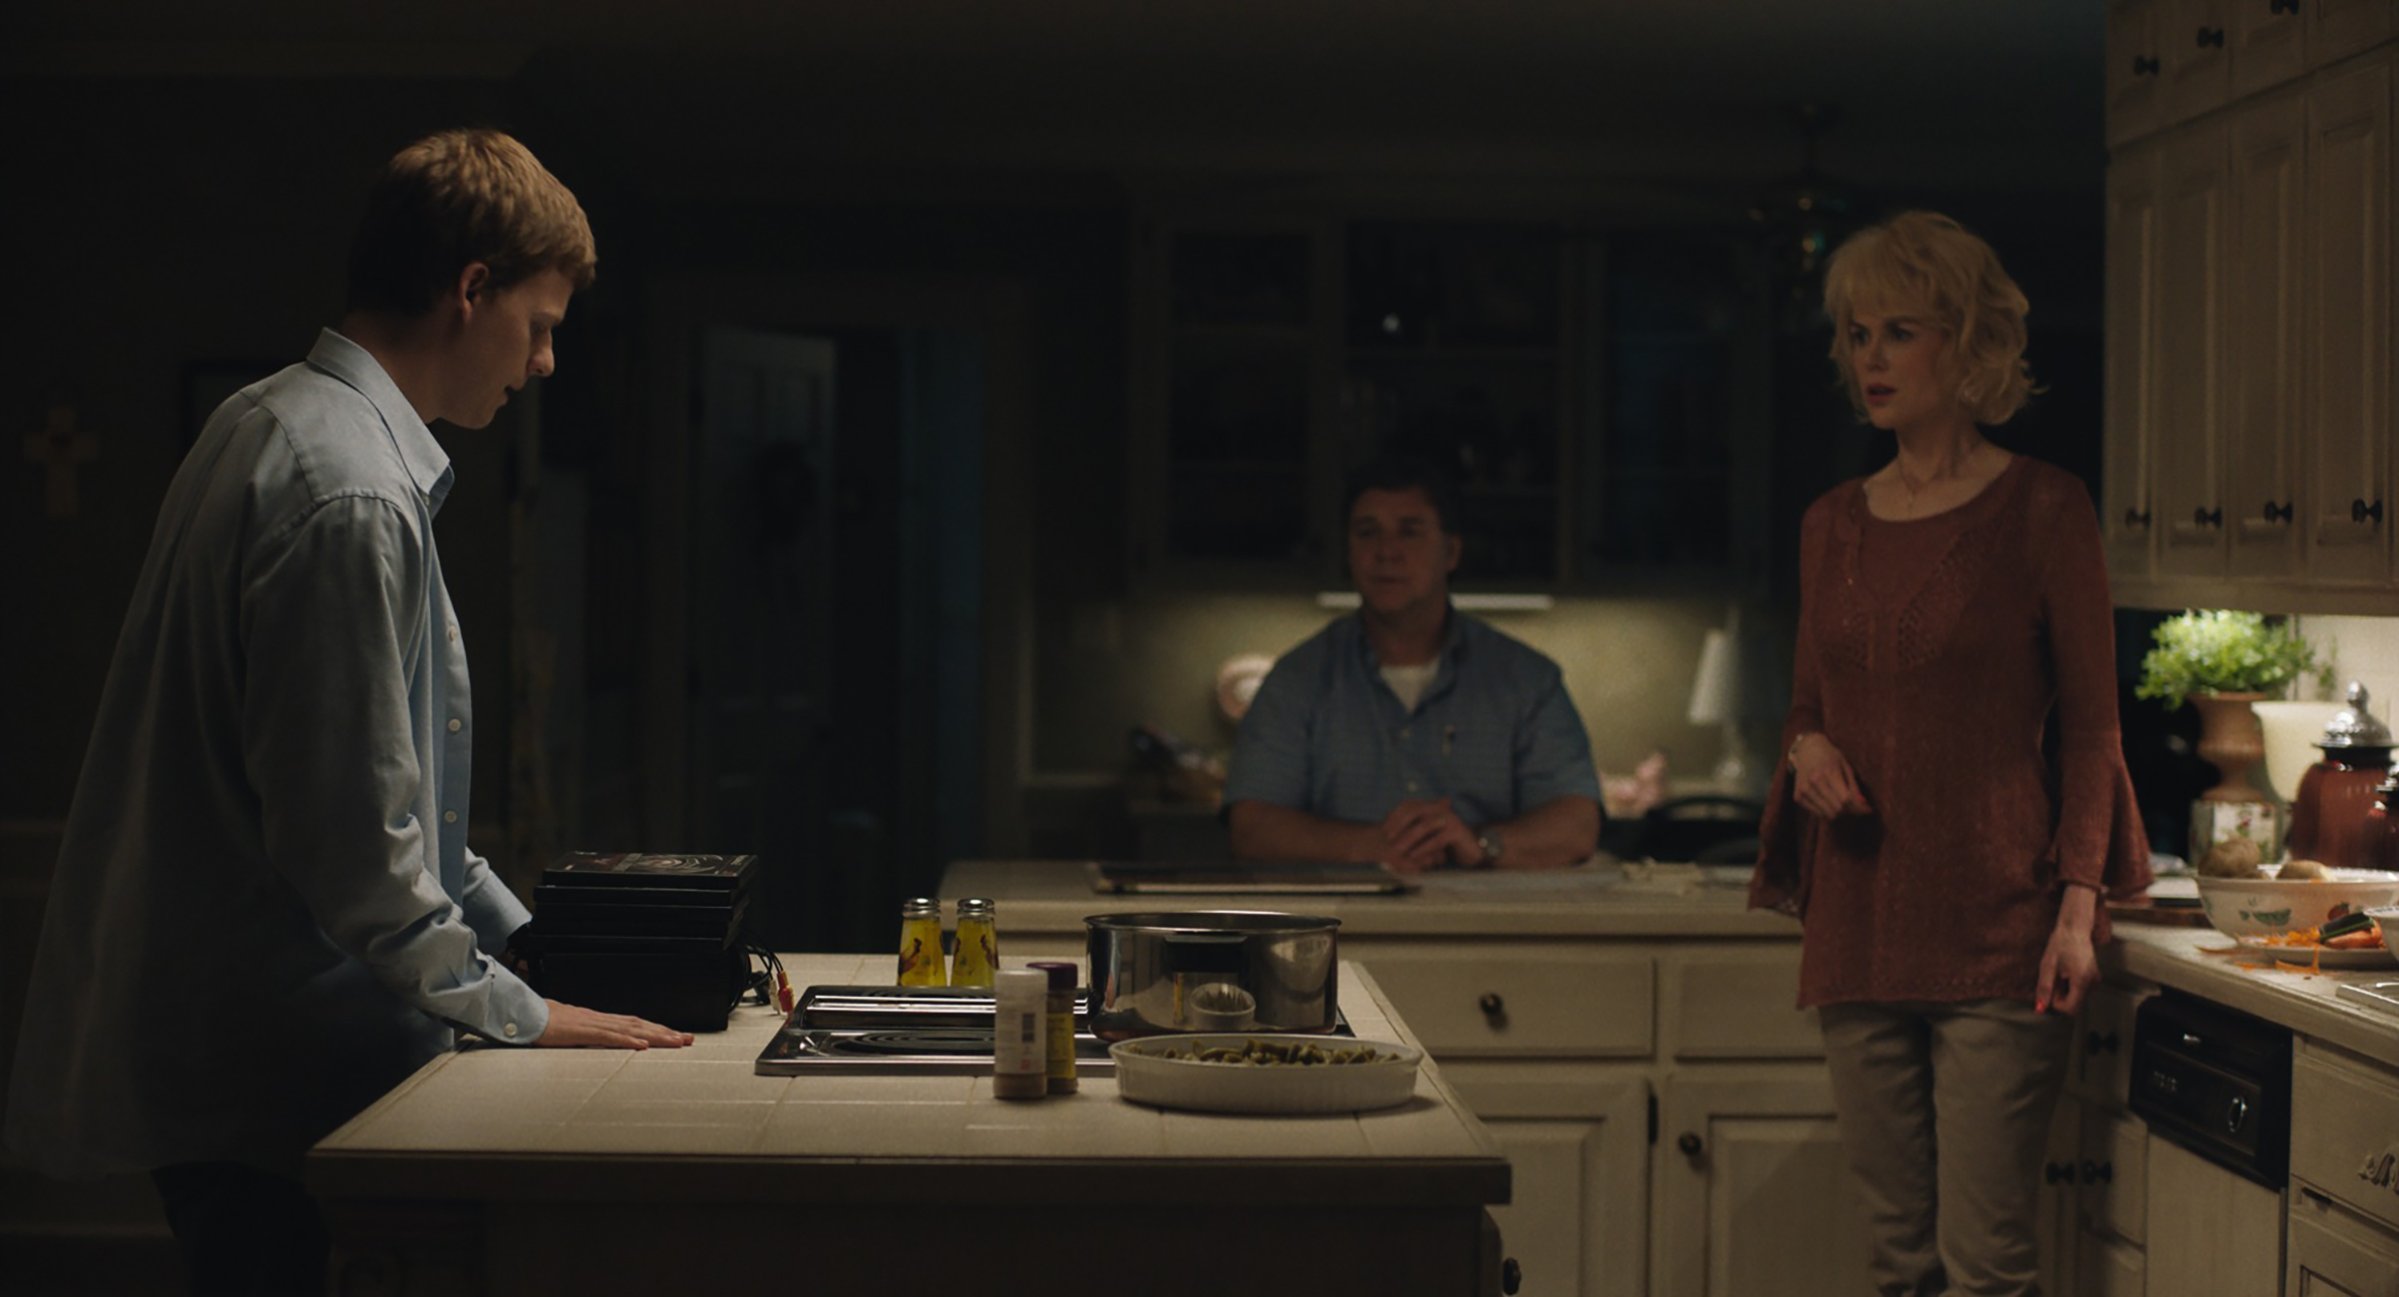 Lucas Hedges stars as Jared and Russel Crowe and Nicole Kidman as Jared's parents, Marshall and Nancy in Joel Edgerton’s Boy Erased, a Focus Features release.